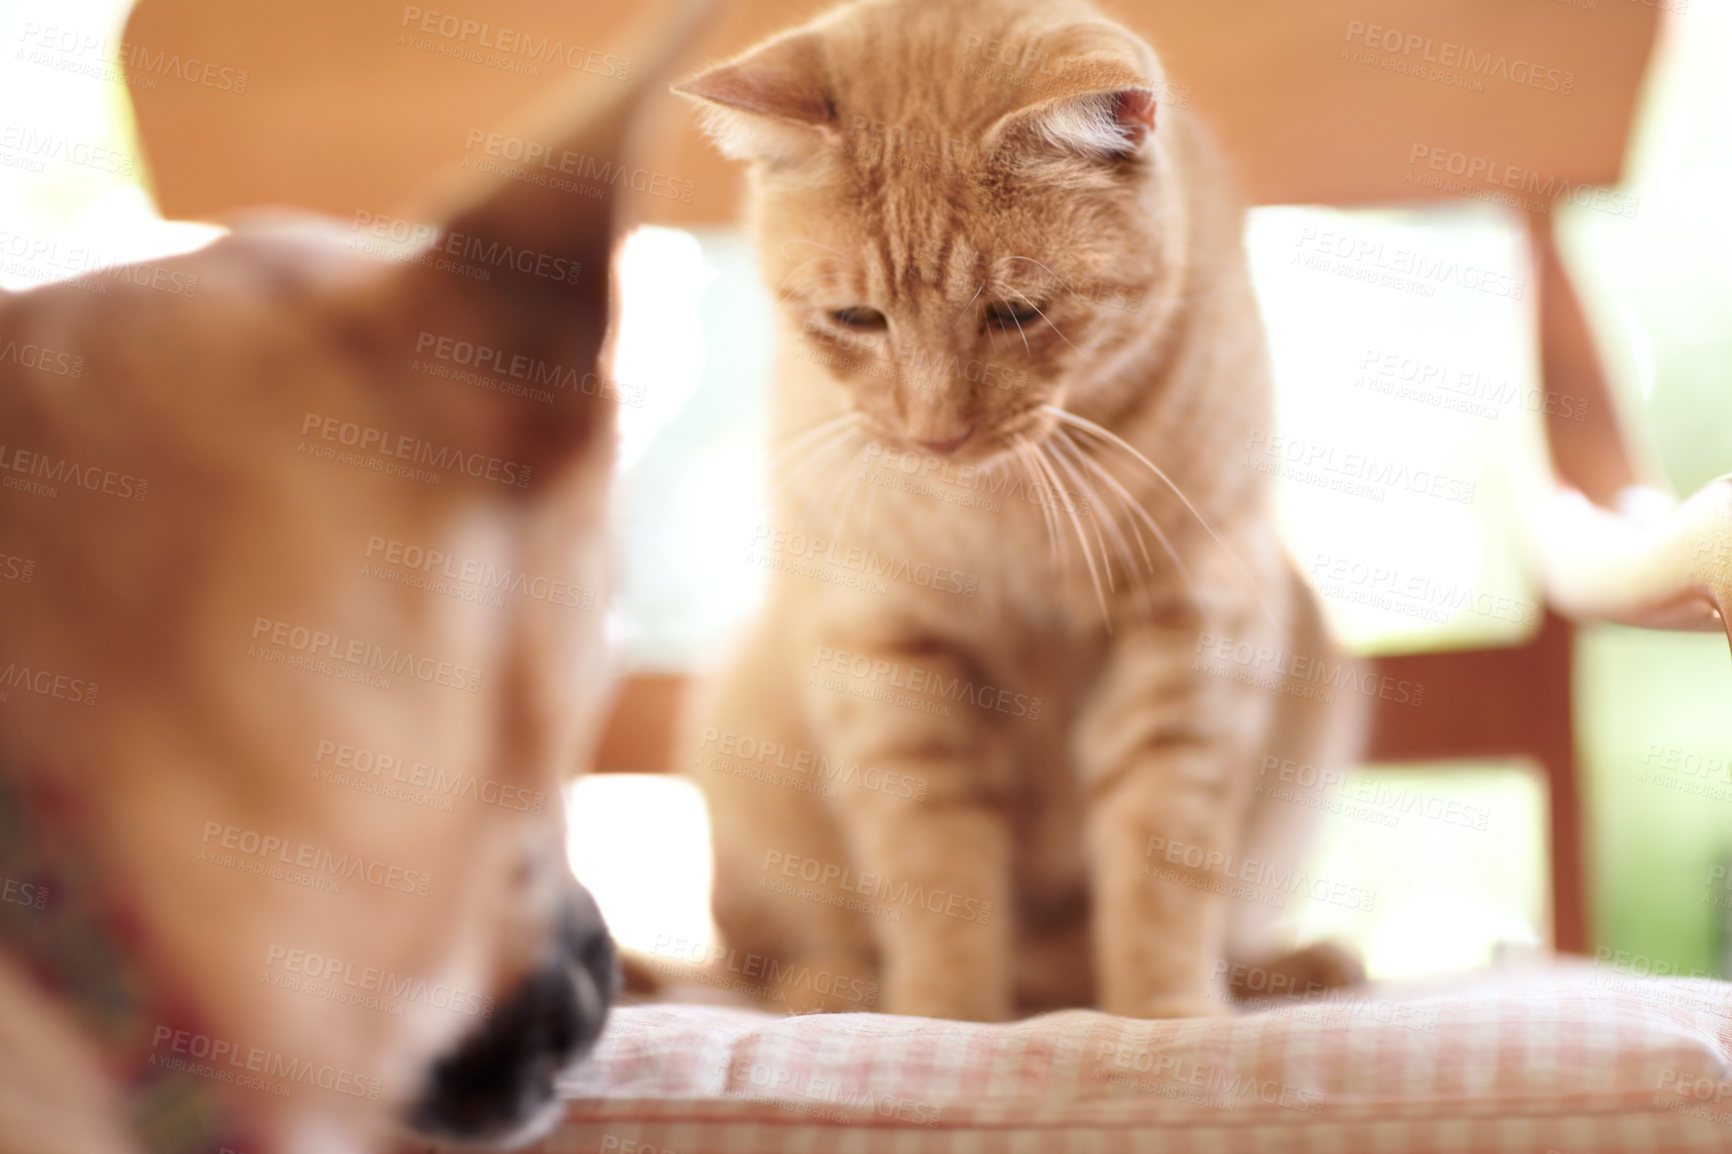 Buy stock photo An adorable ginger tabby sitting on a chair looking down at a German Shepherd